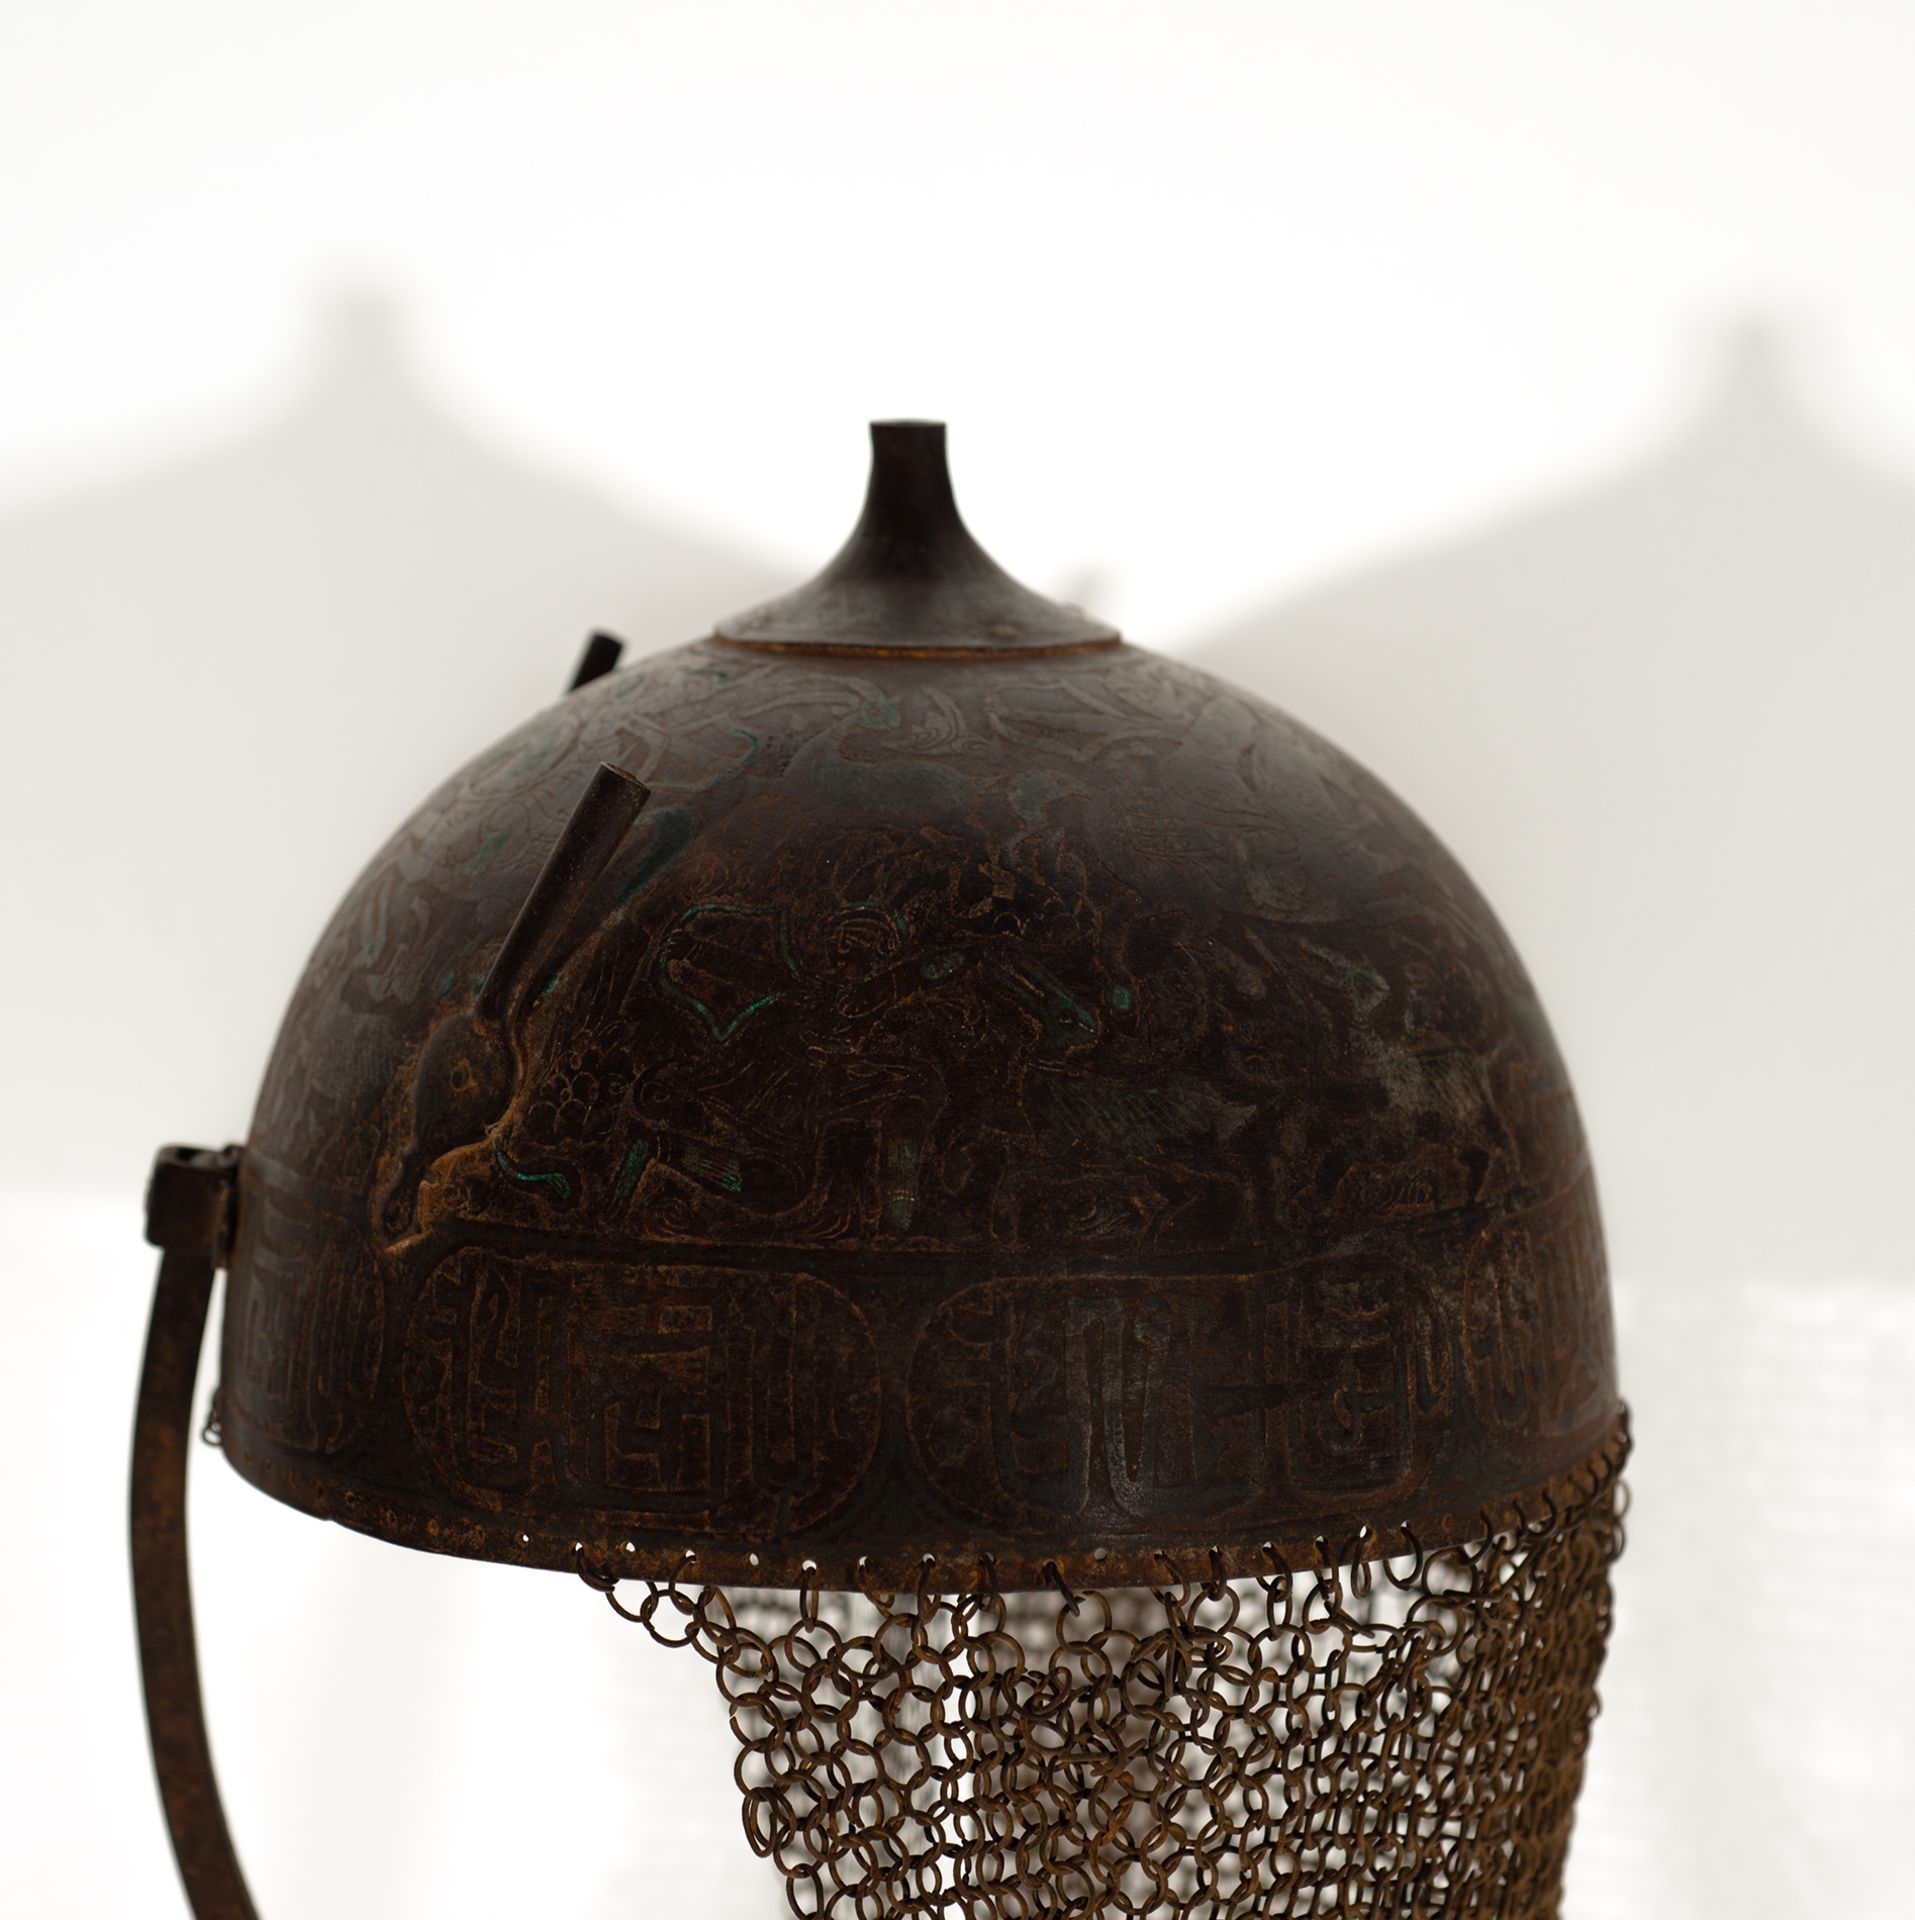 "Kulah Khud" Helmet of a Persian Infantry Knight, Central Asia, 19th century - Image 3 of 6